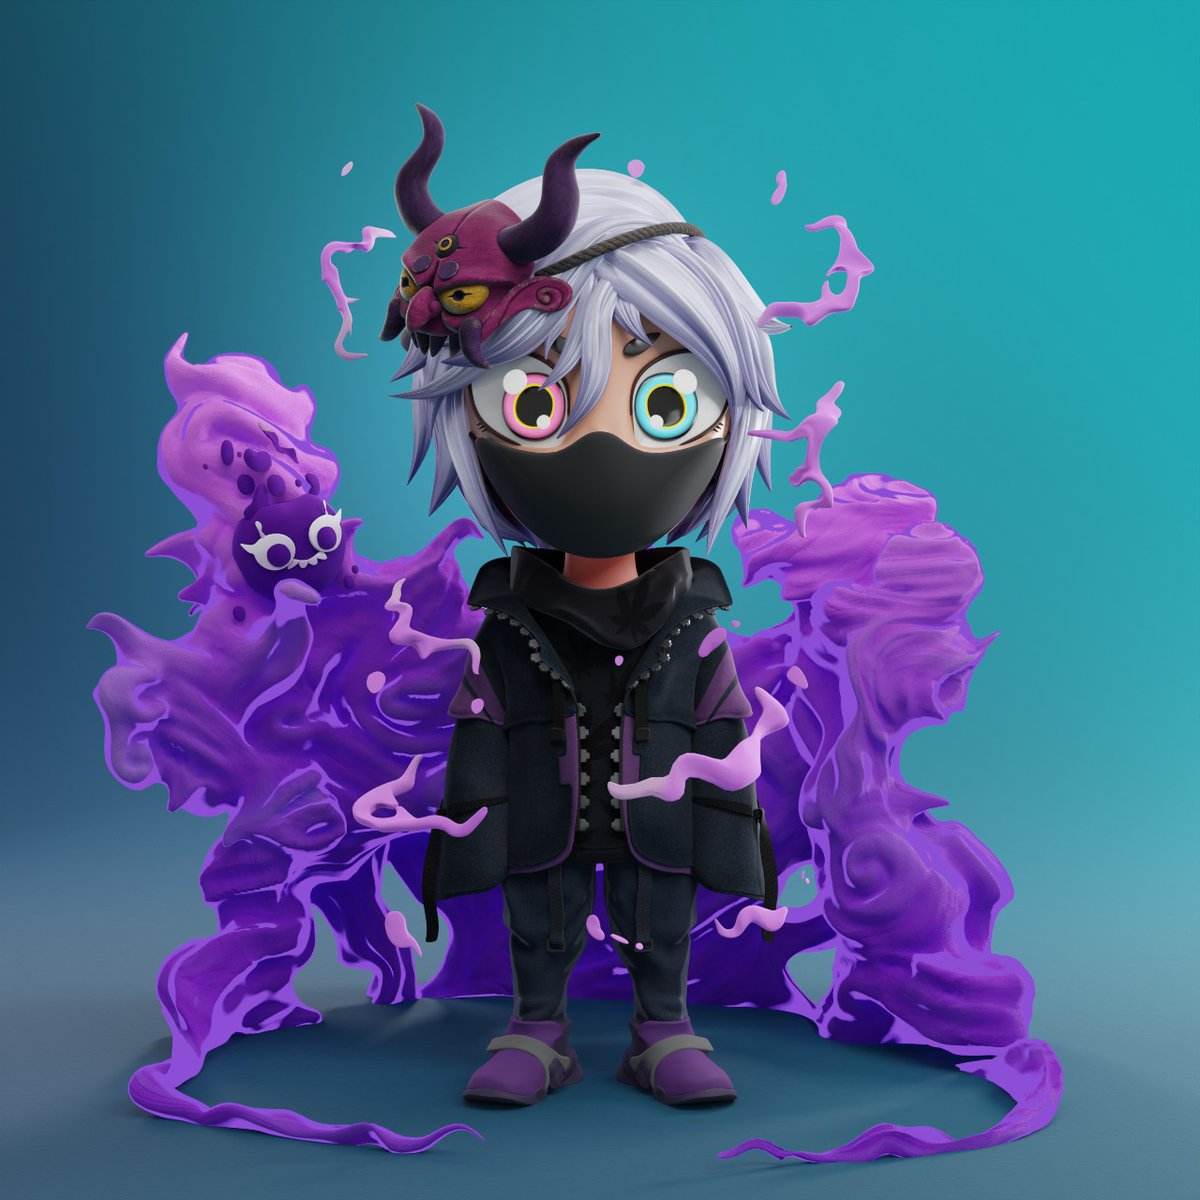 Get ready to meet the Epic EGAO 👾 Show some love cause he's here to give away 3D WL for 2 lucky Furus! 🎉 Follow, RT, Like and tag all your fellow Furus! L F G 🚀